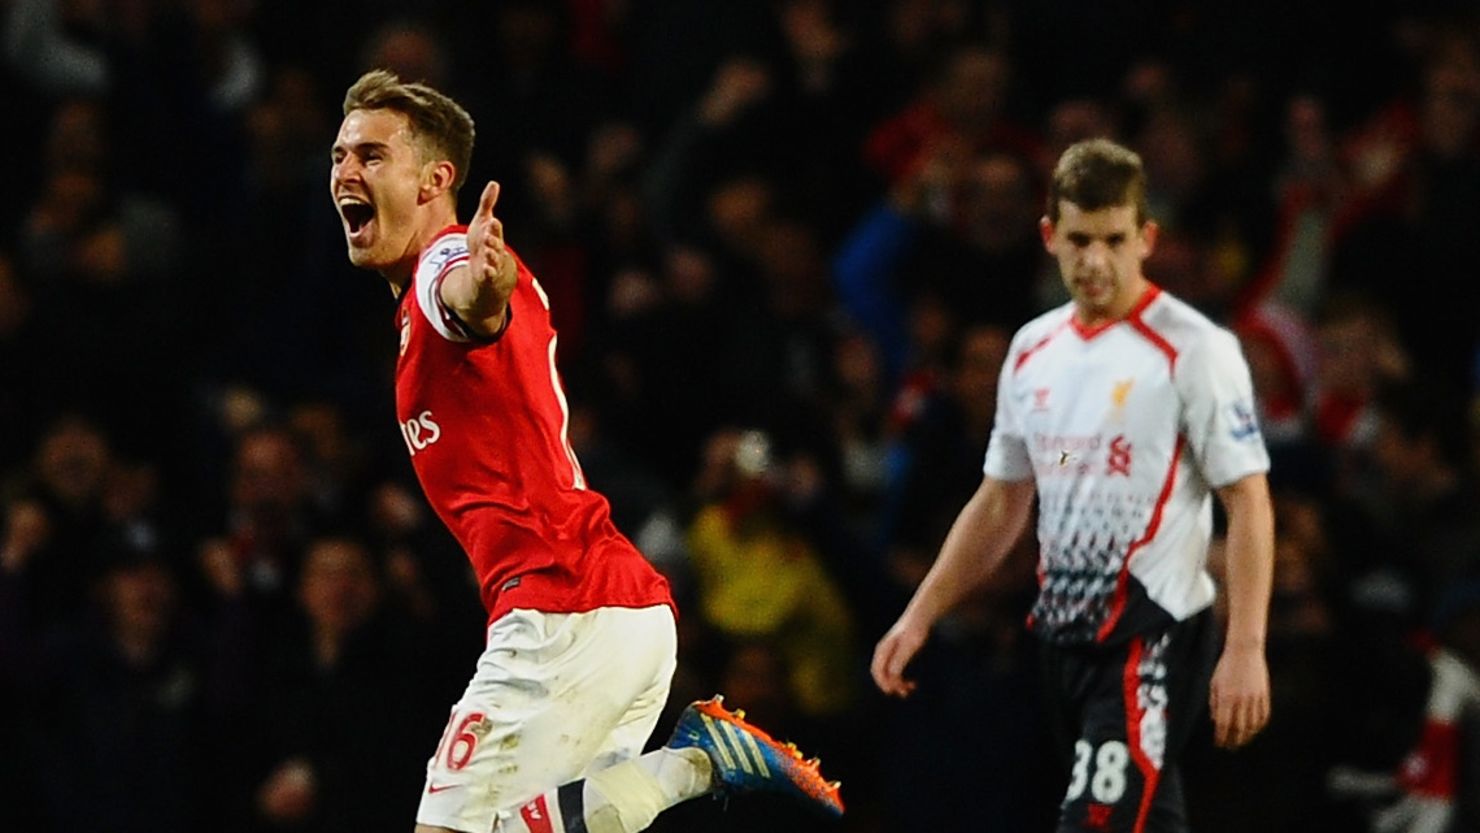 Aaron Ramsey celebrates after scoring Arsenal's second goal in Saturday's 2-0 win at home to Liverpool.